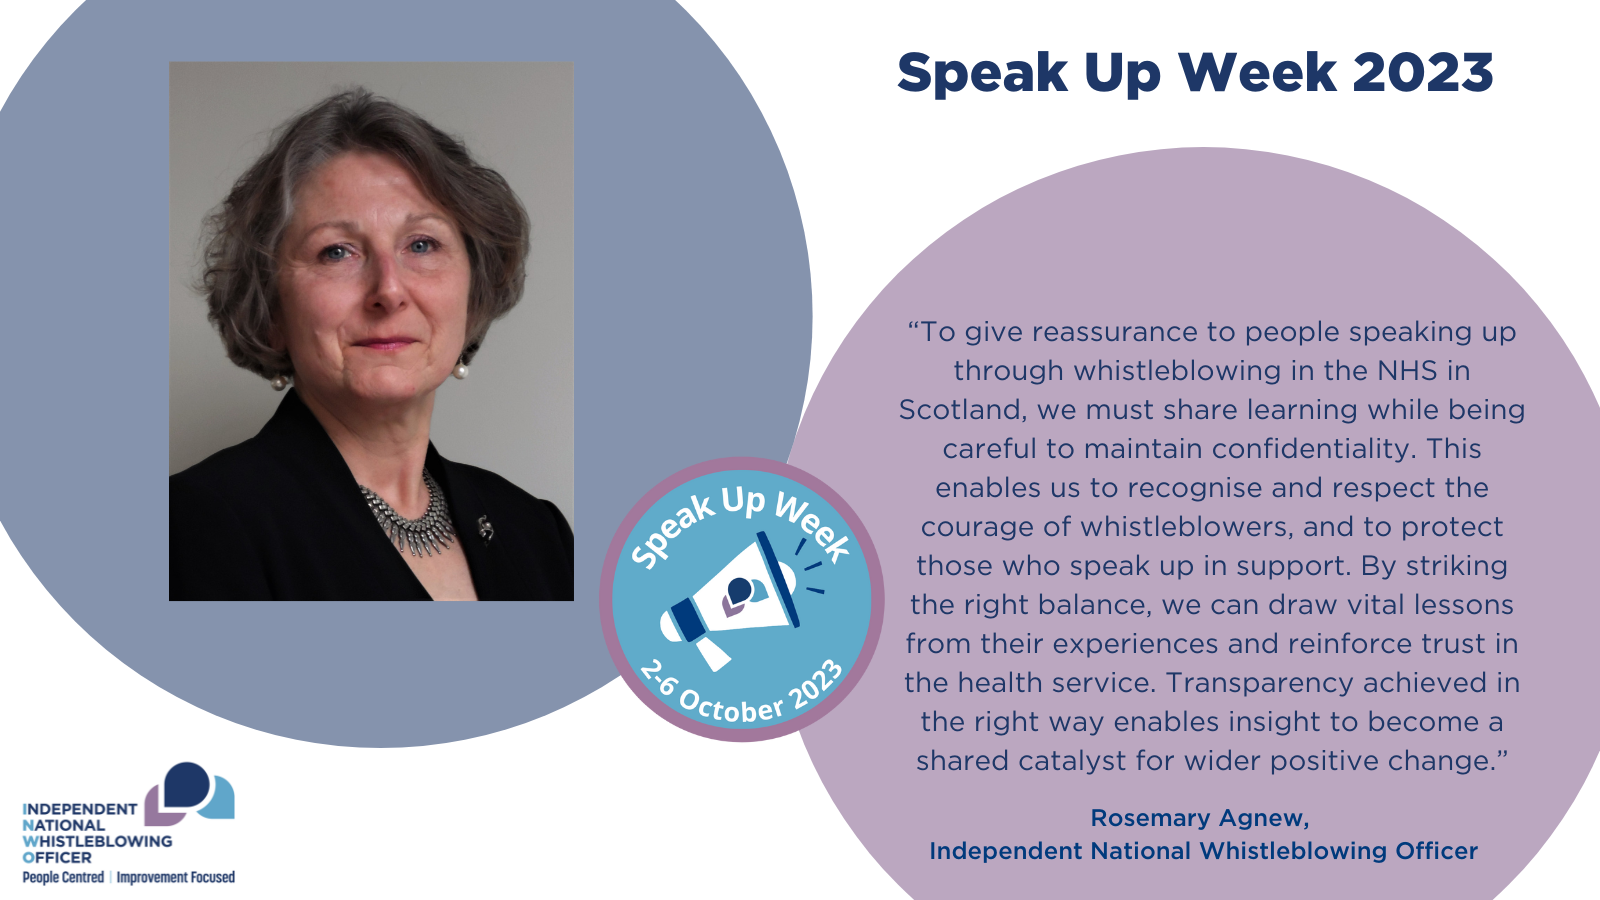 A statement from the INWO, Rosemary Agnew: To give reassurance to people speaking up through whistleblowing in the NHS in Scotland, we must share learning while being careful to maintain confidentiality. This enables us to recognise and respect the courage of whistleblowers, and to protect those who speak up in support. By striking the right balance, we can draw vital lessons from their experiences and reinforce trust in the health service. Transparency achieved in the right way enables insight to become a shared catalyst for wider positive change.